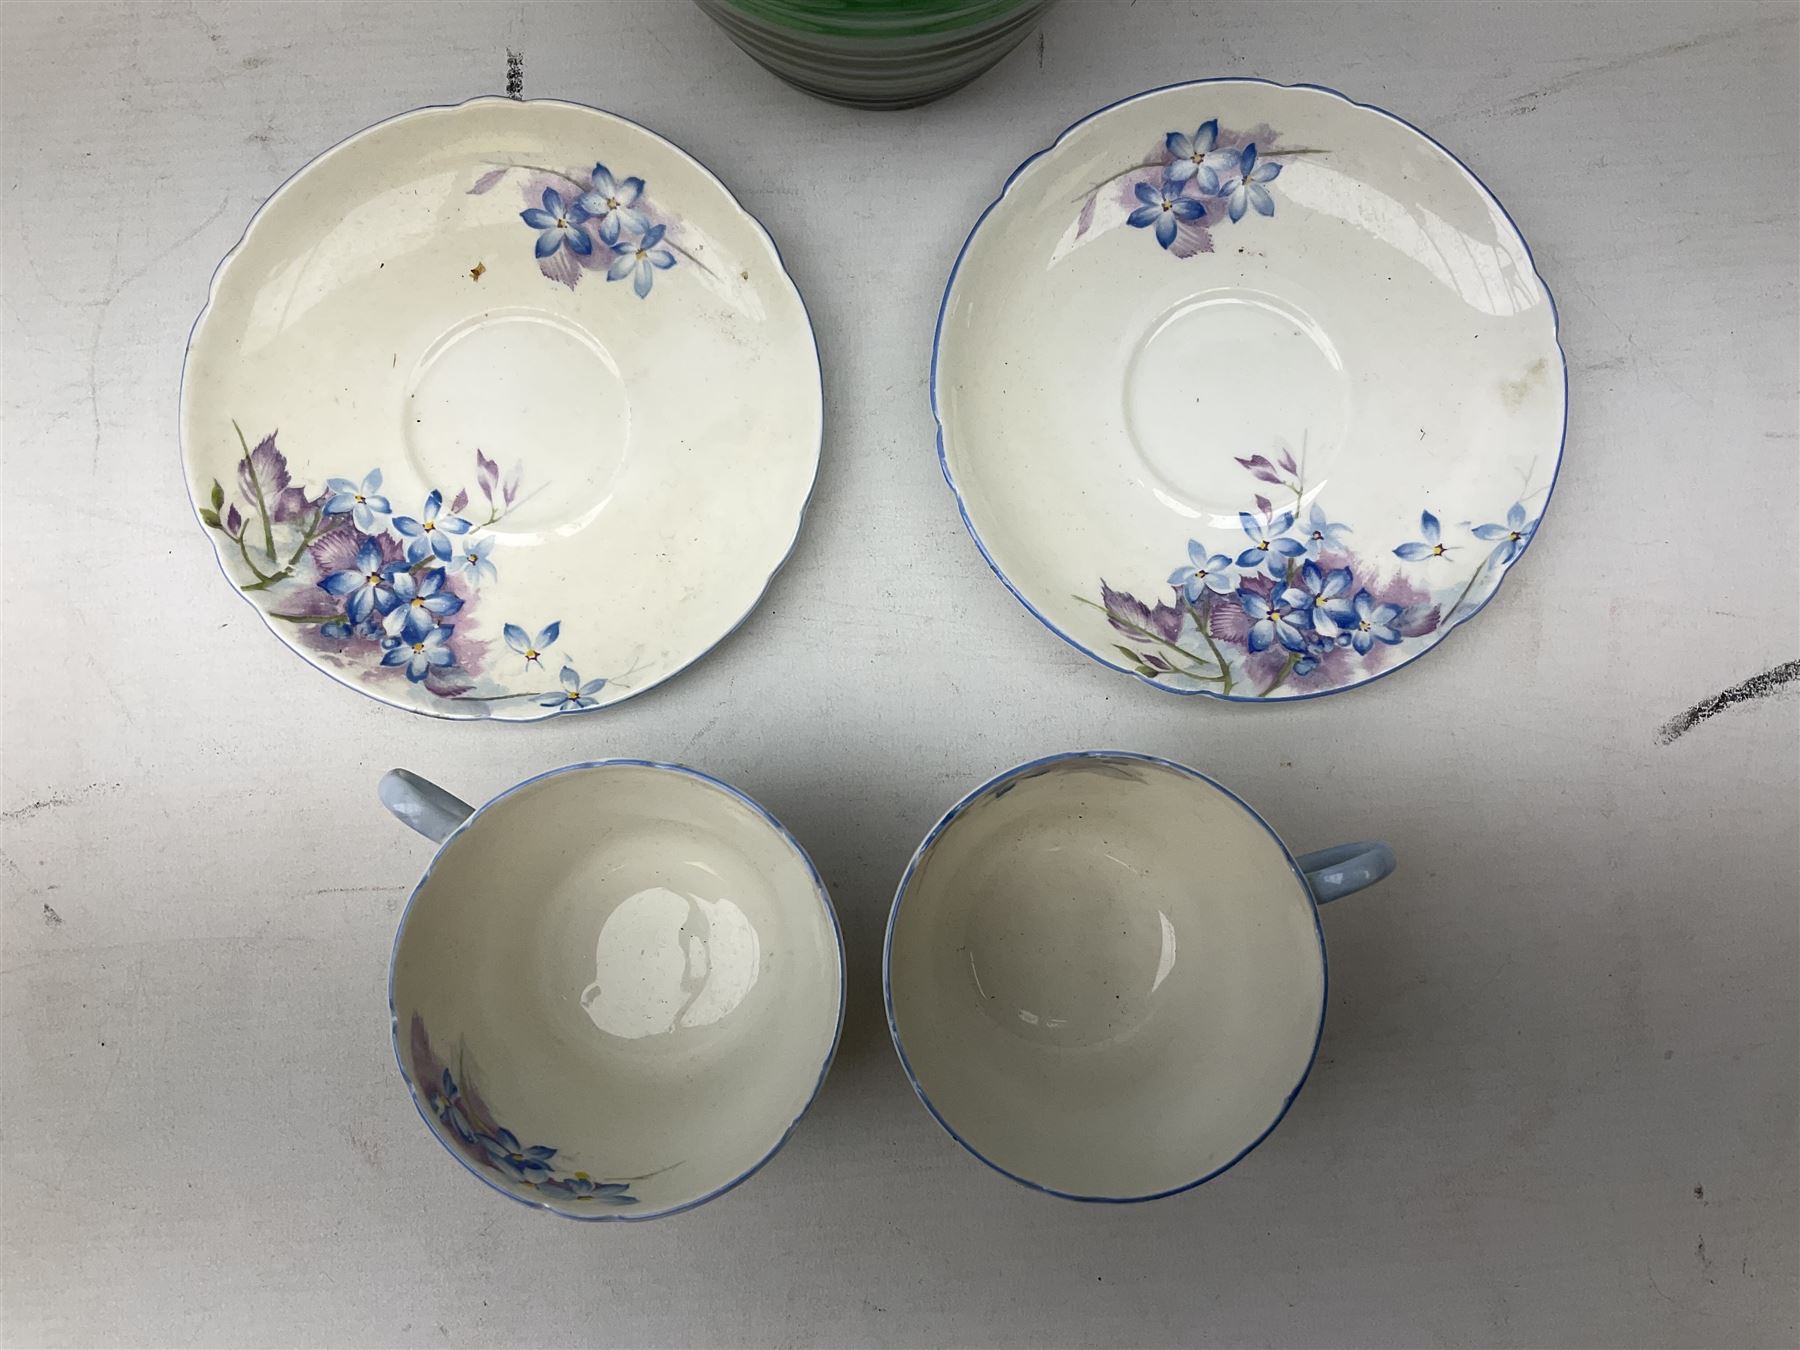 Pair of Shelley blue spray pattern teacups and saucers - Image 2 of 4